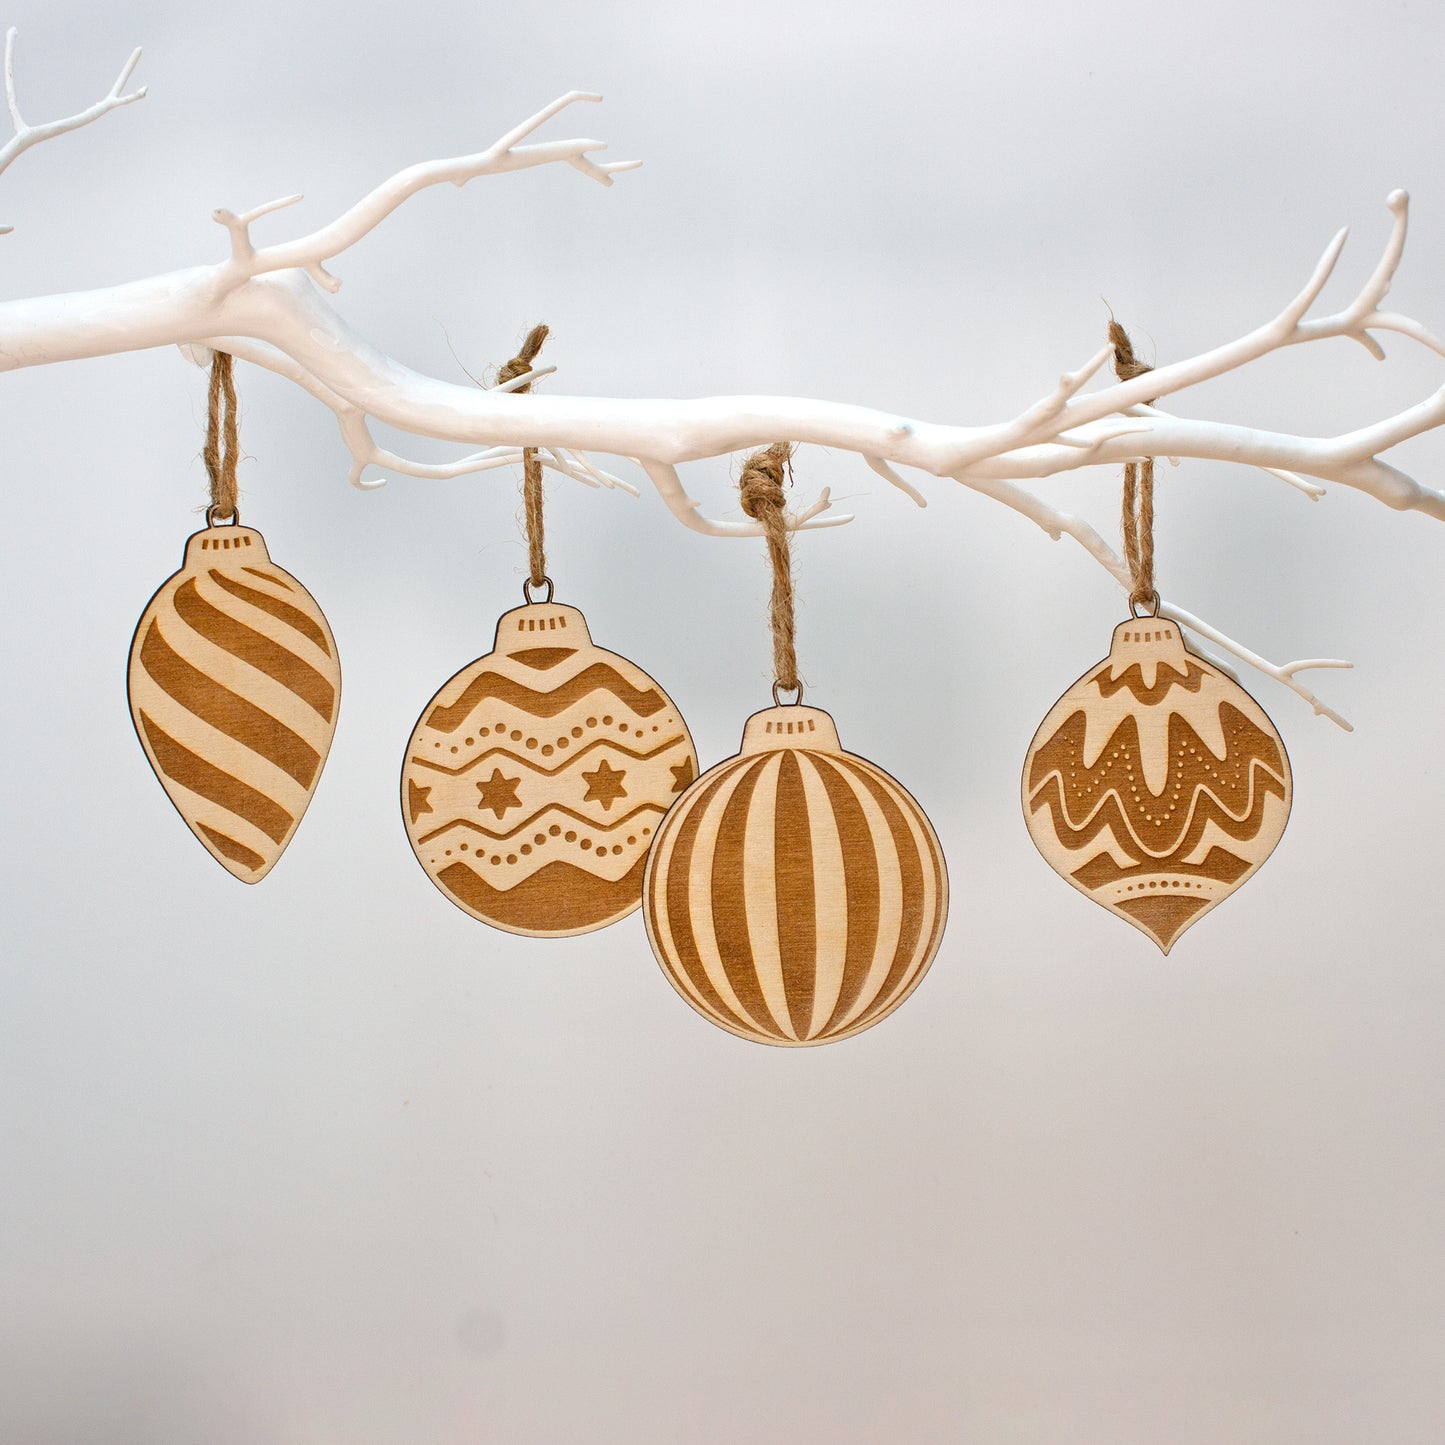 Wooden Vintage Christmas Baubles, Set of 4 Retro Tree Ornaments